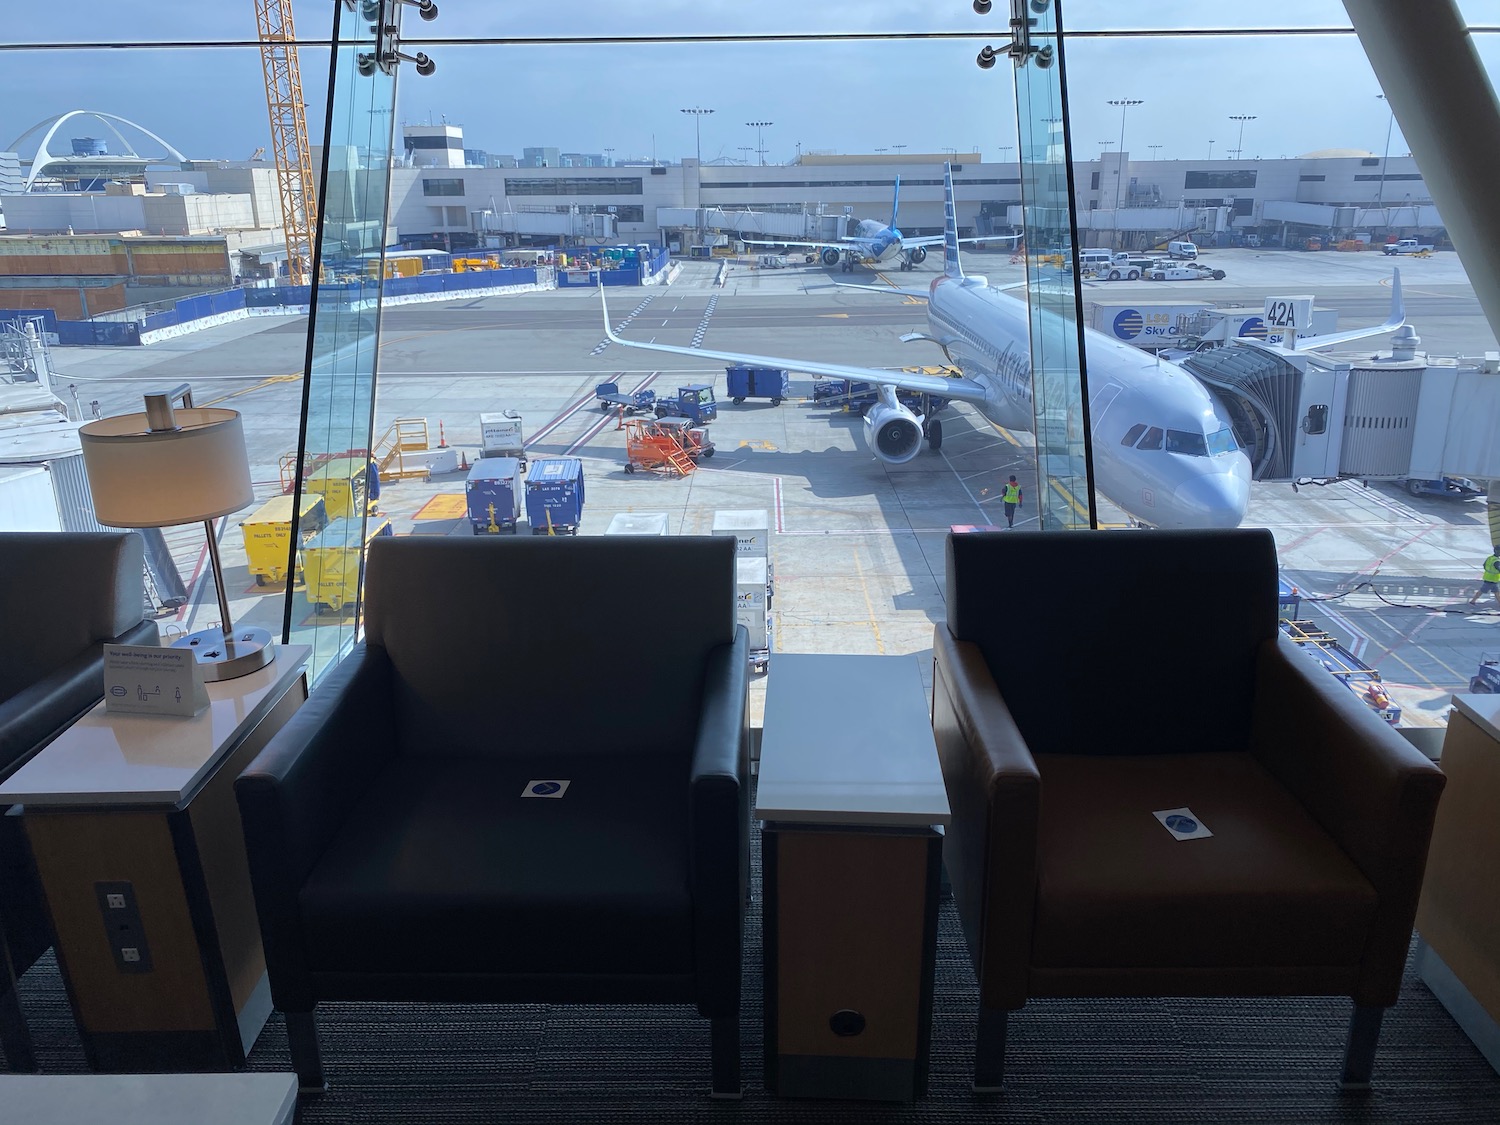 two chairs and a plane in an airport